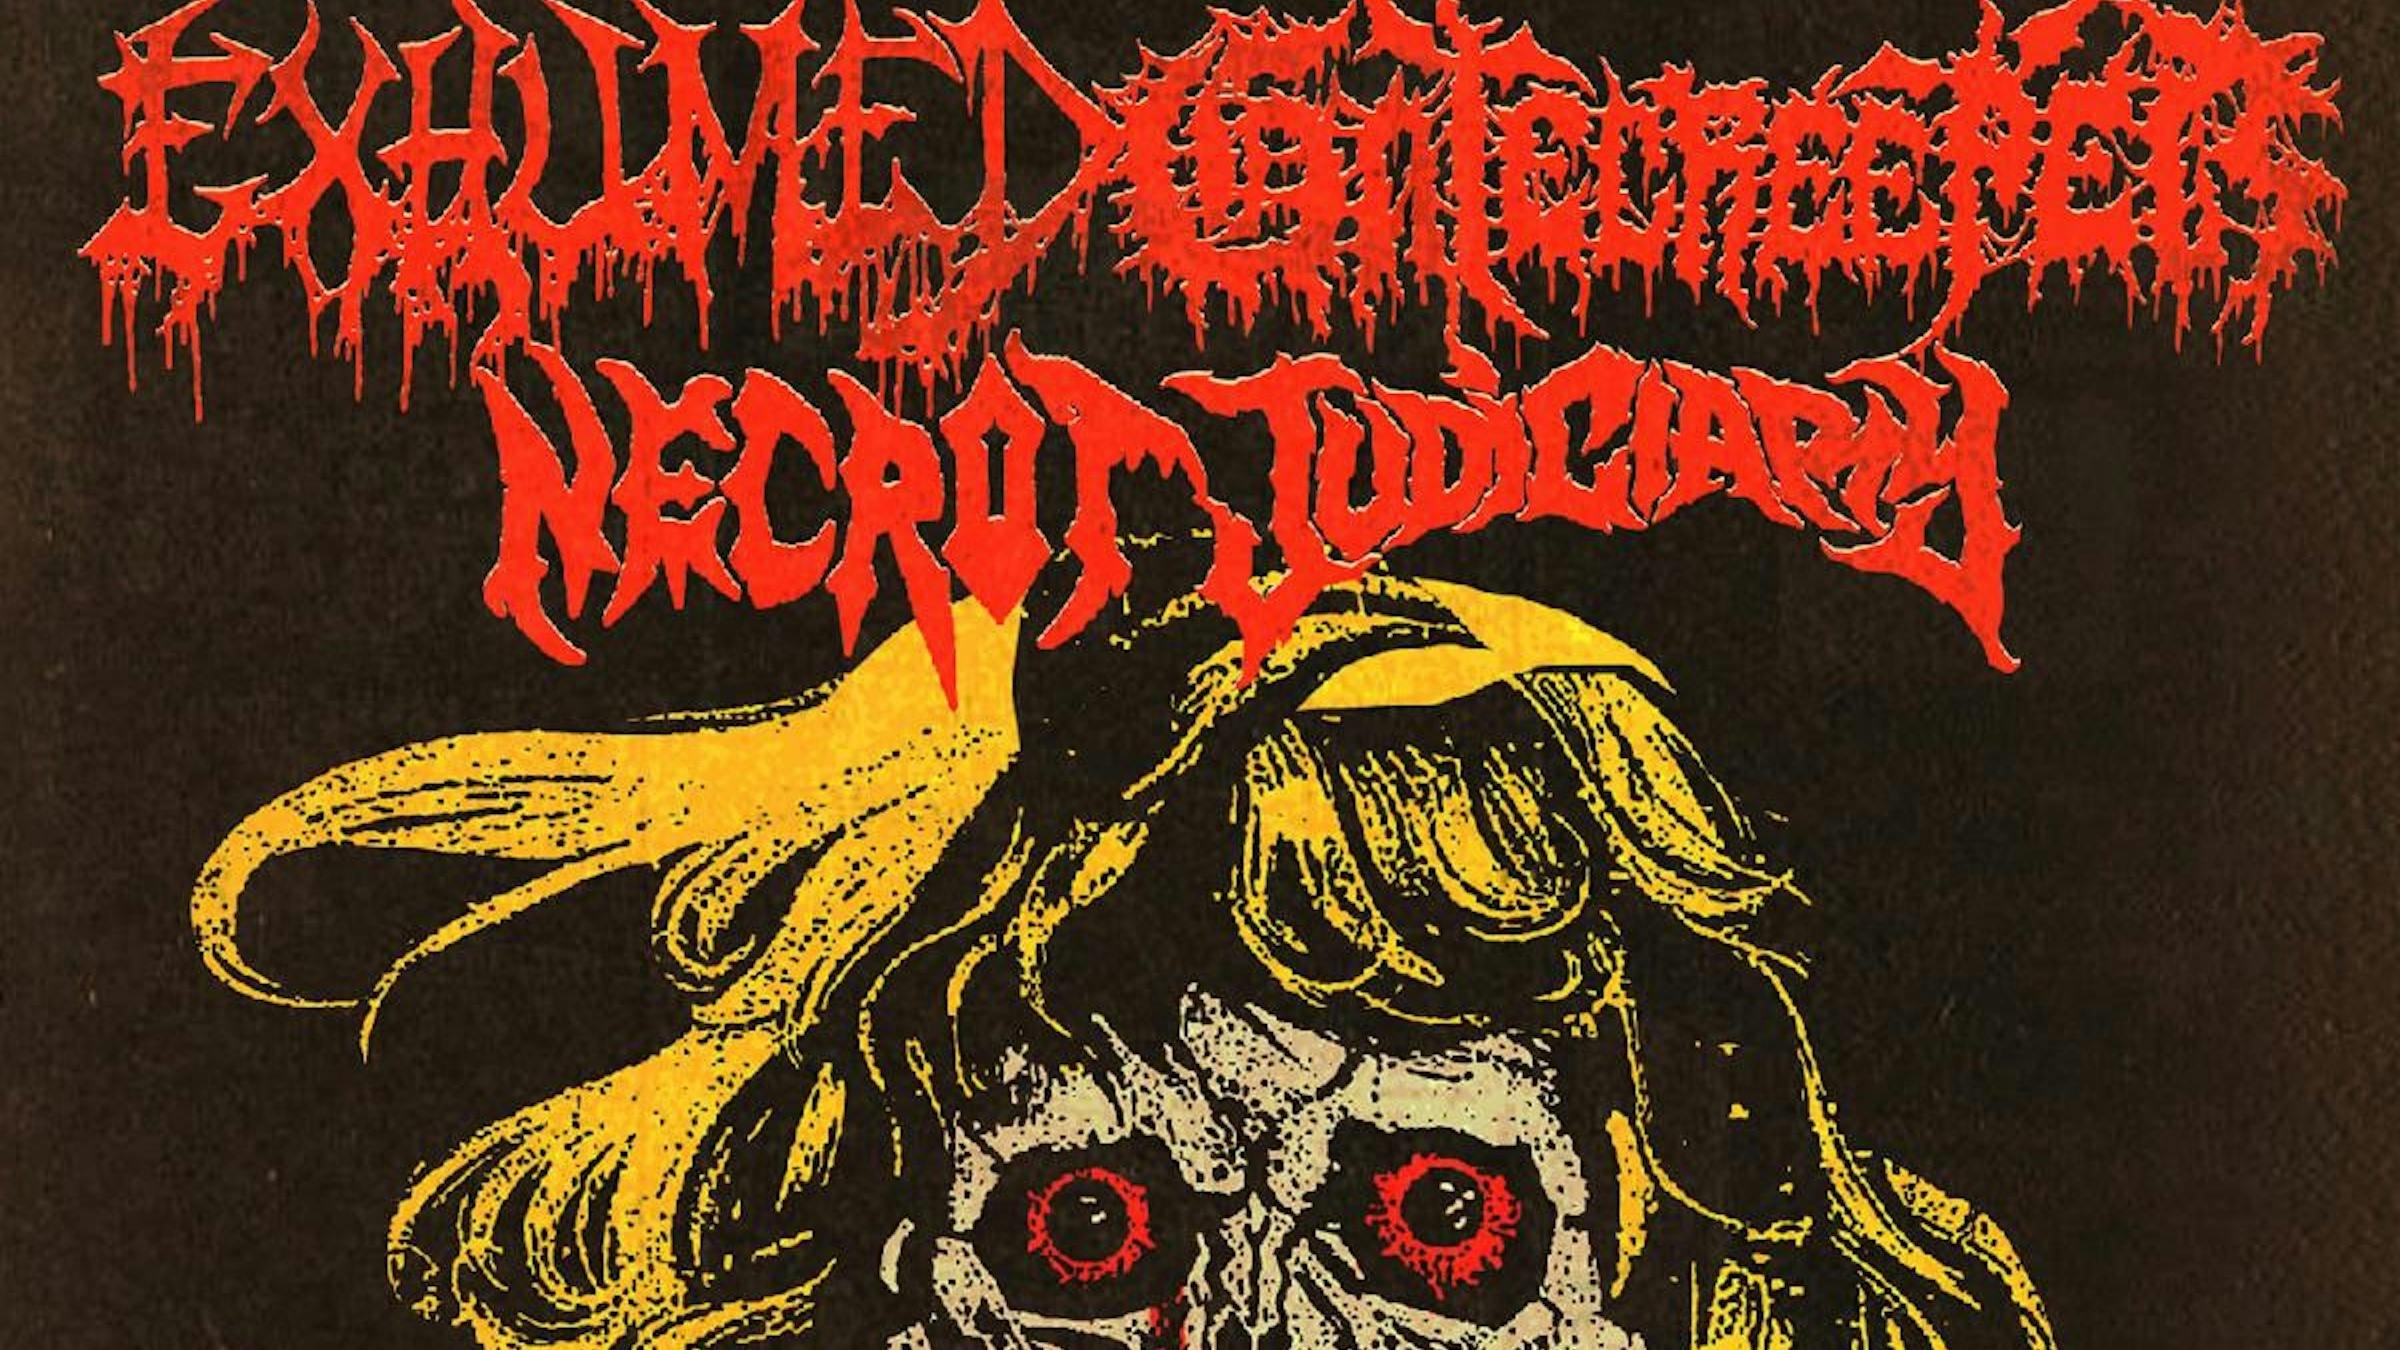 Gatecreeper And Exhumed Announce Co-Headlining U.S. Tour